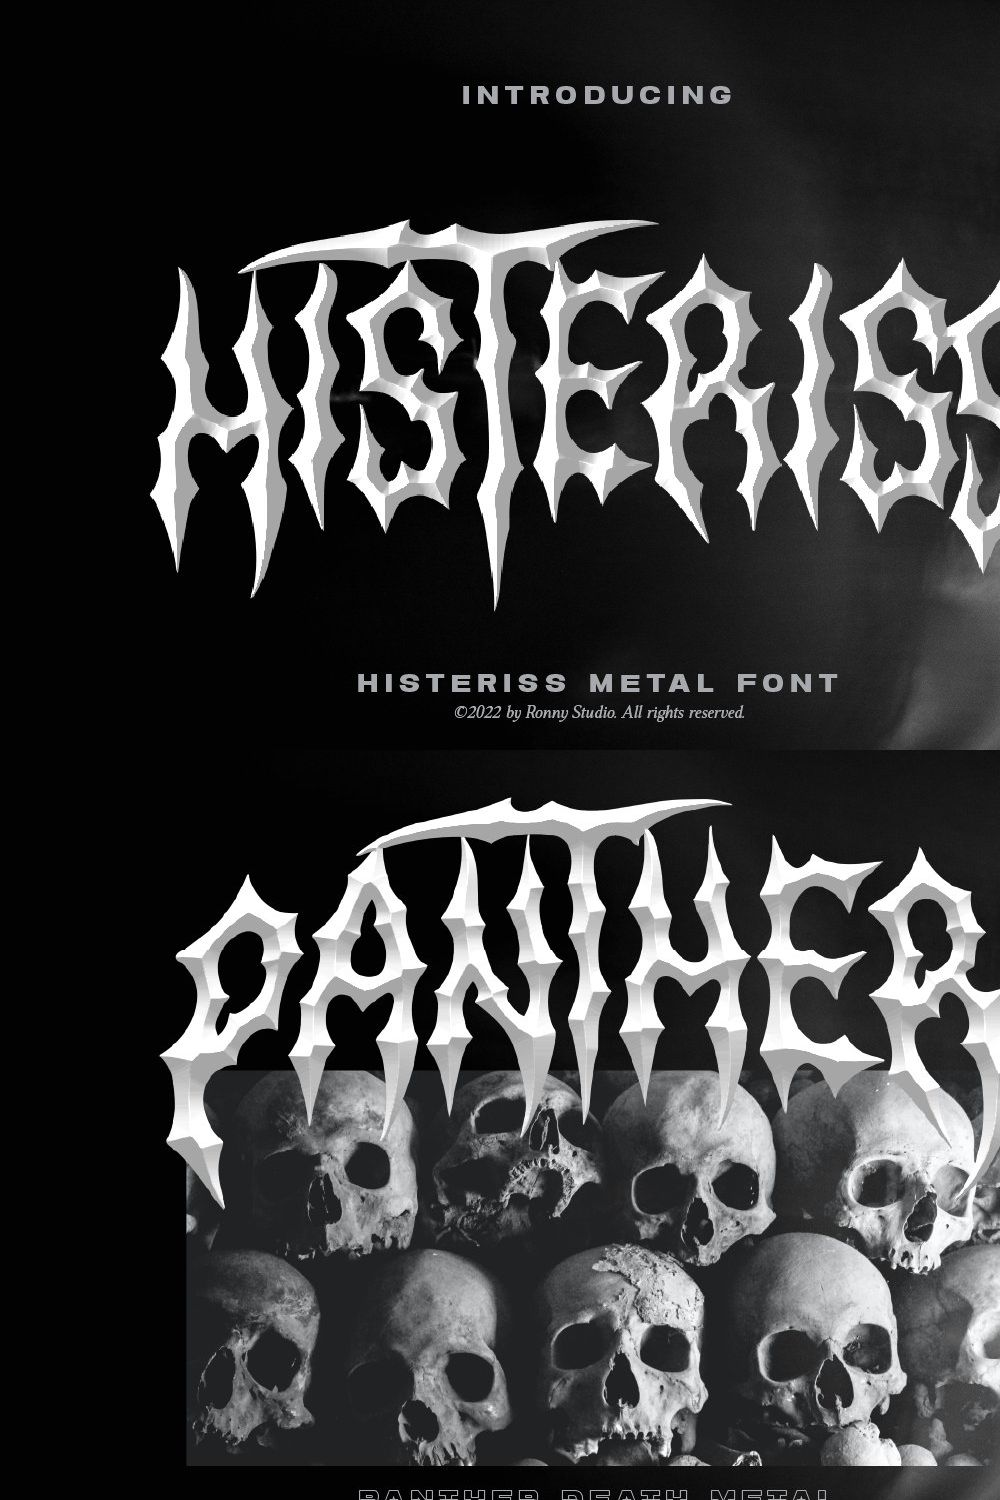 Histeriss - Metal Font pinterest preview image.